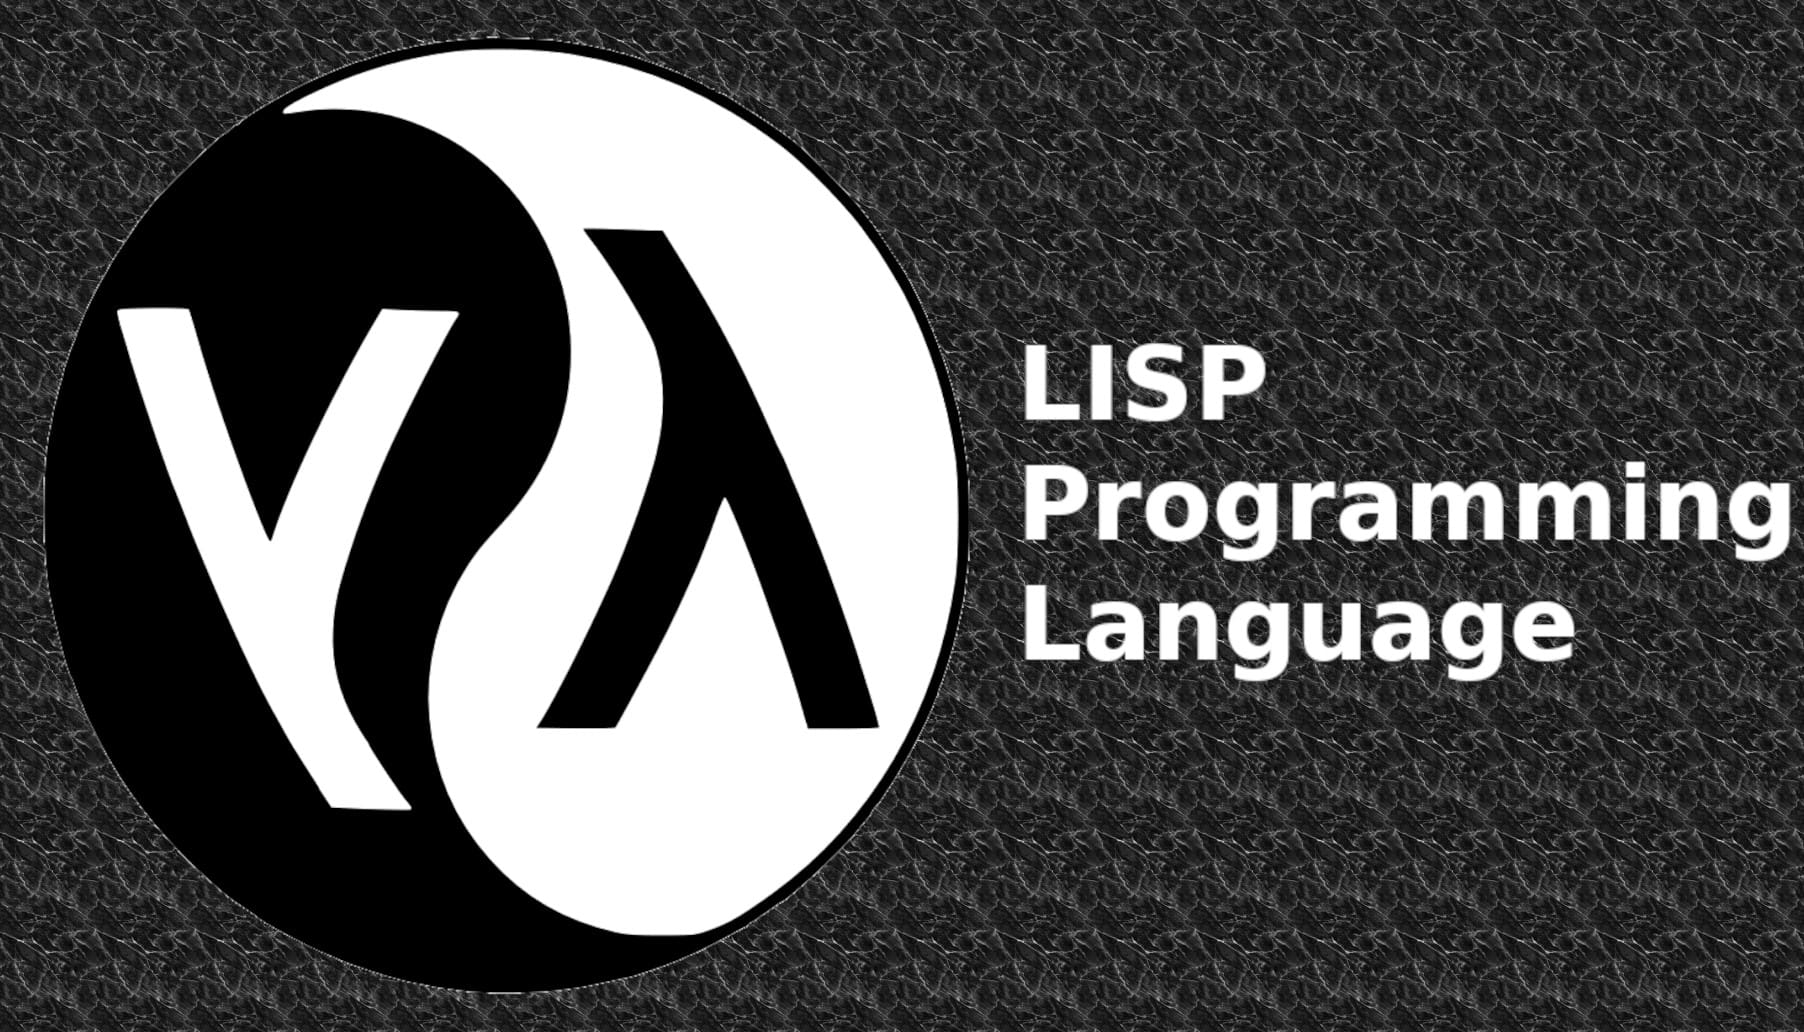 7-facts-you-must-know-about-lisp-1707389760.jpg